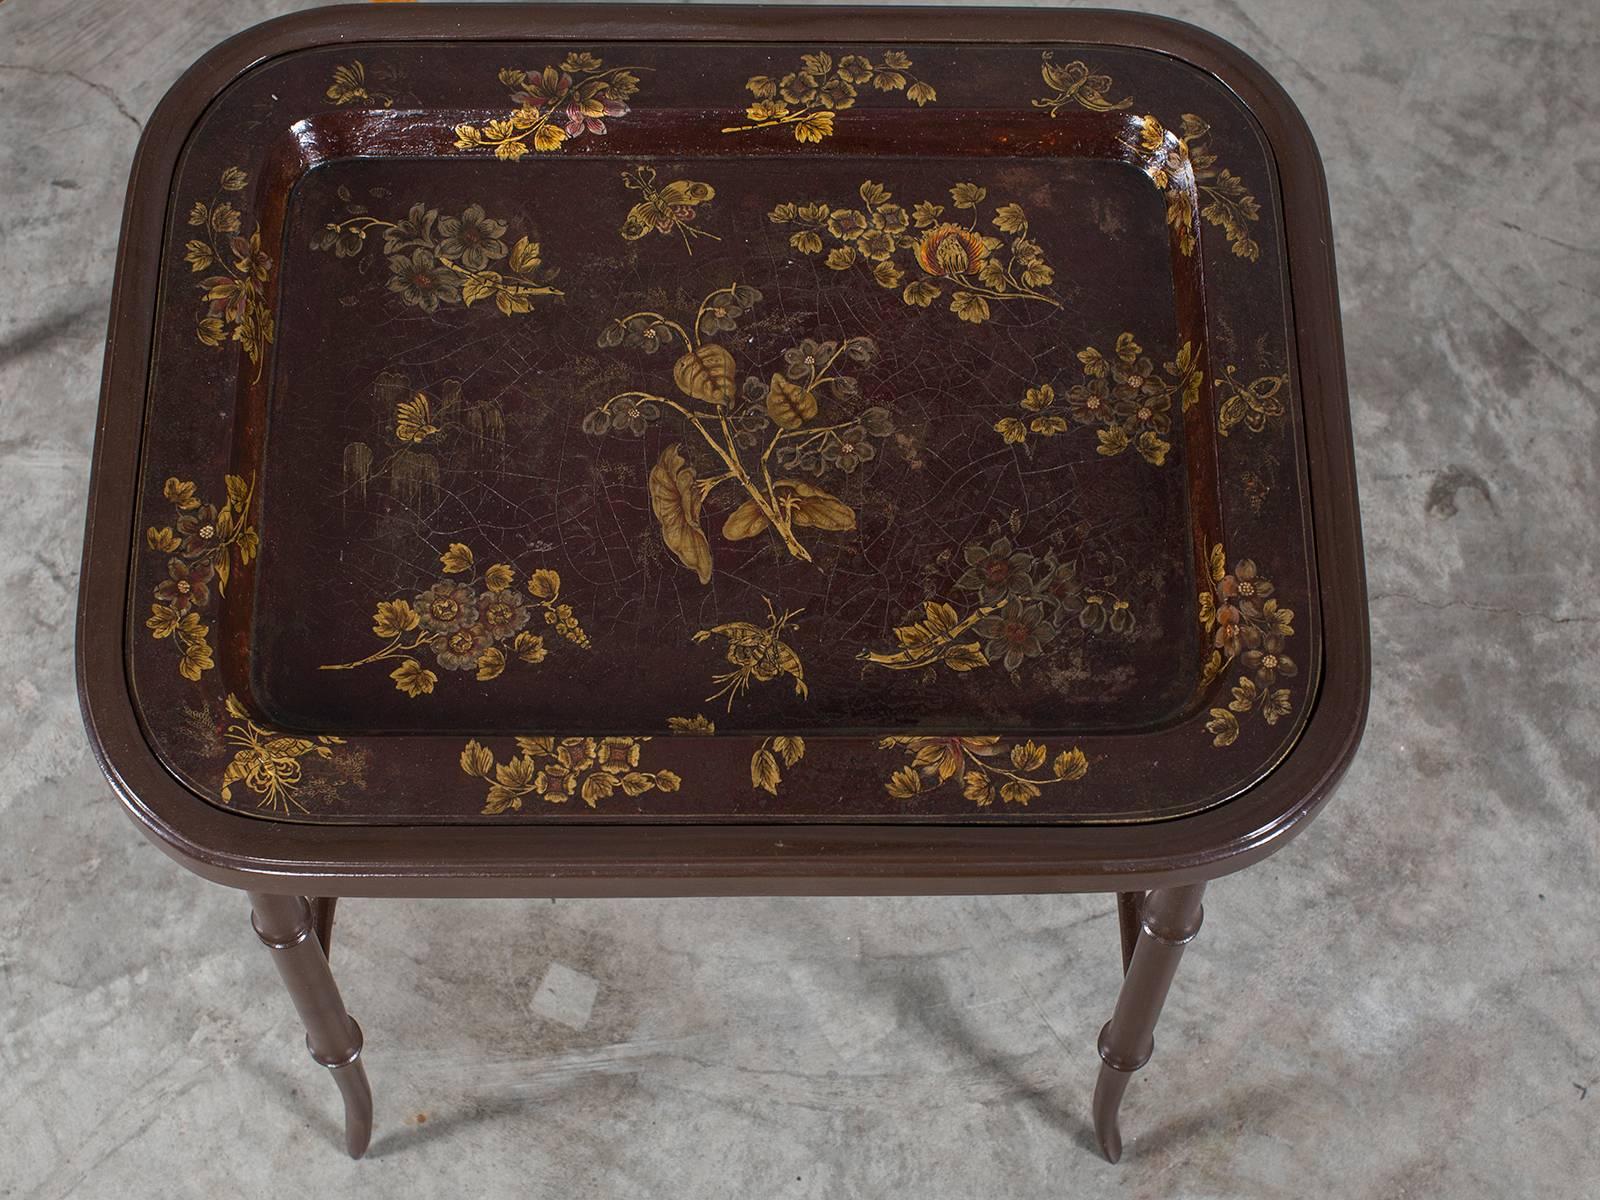 
A large antique French hand-painted tôle tray from the Belle Époque period circa 1890 now mounted on a custom stand. Please notice the unique deep caramel color highlighted with gold designs on the tray and the exceptionally well made custom stand